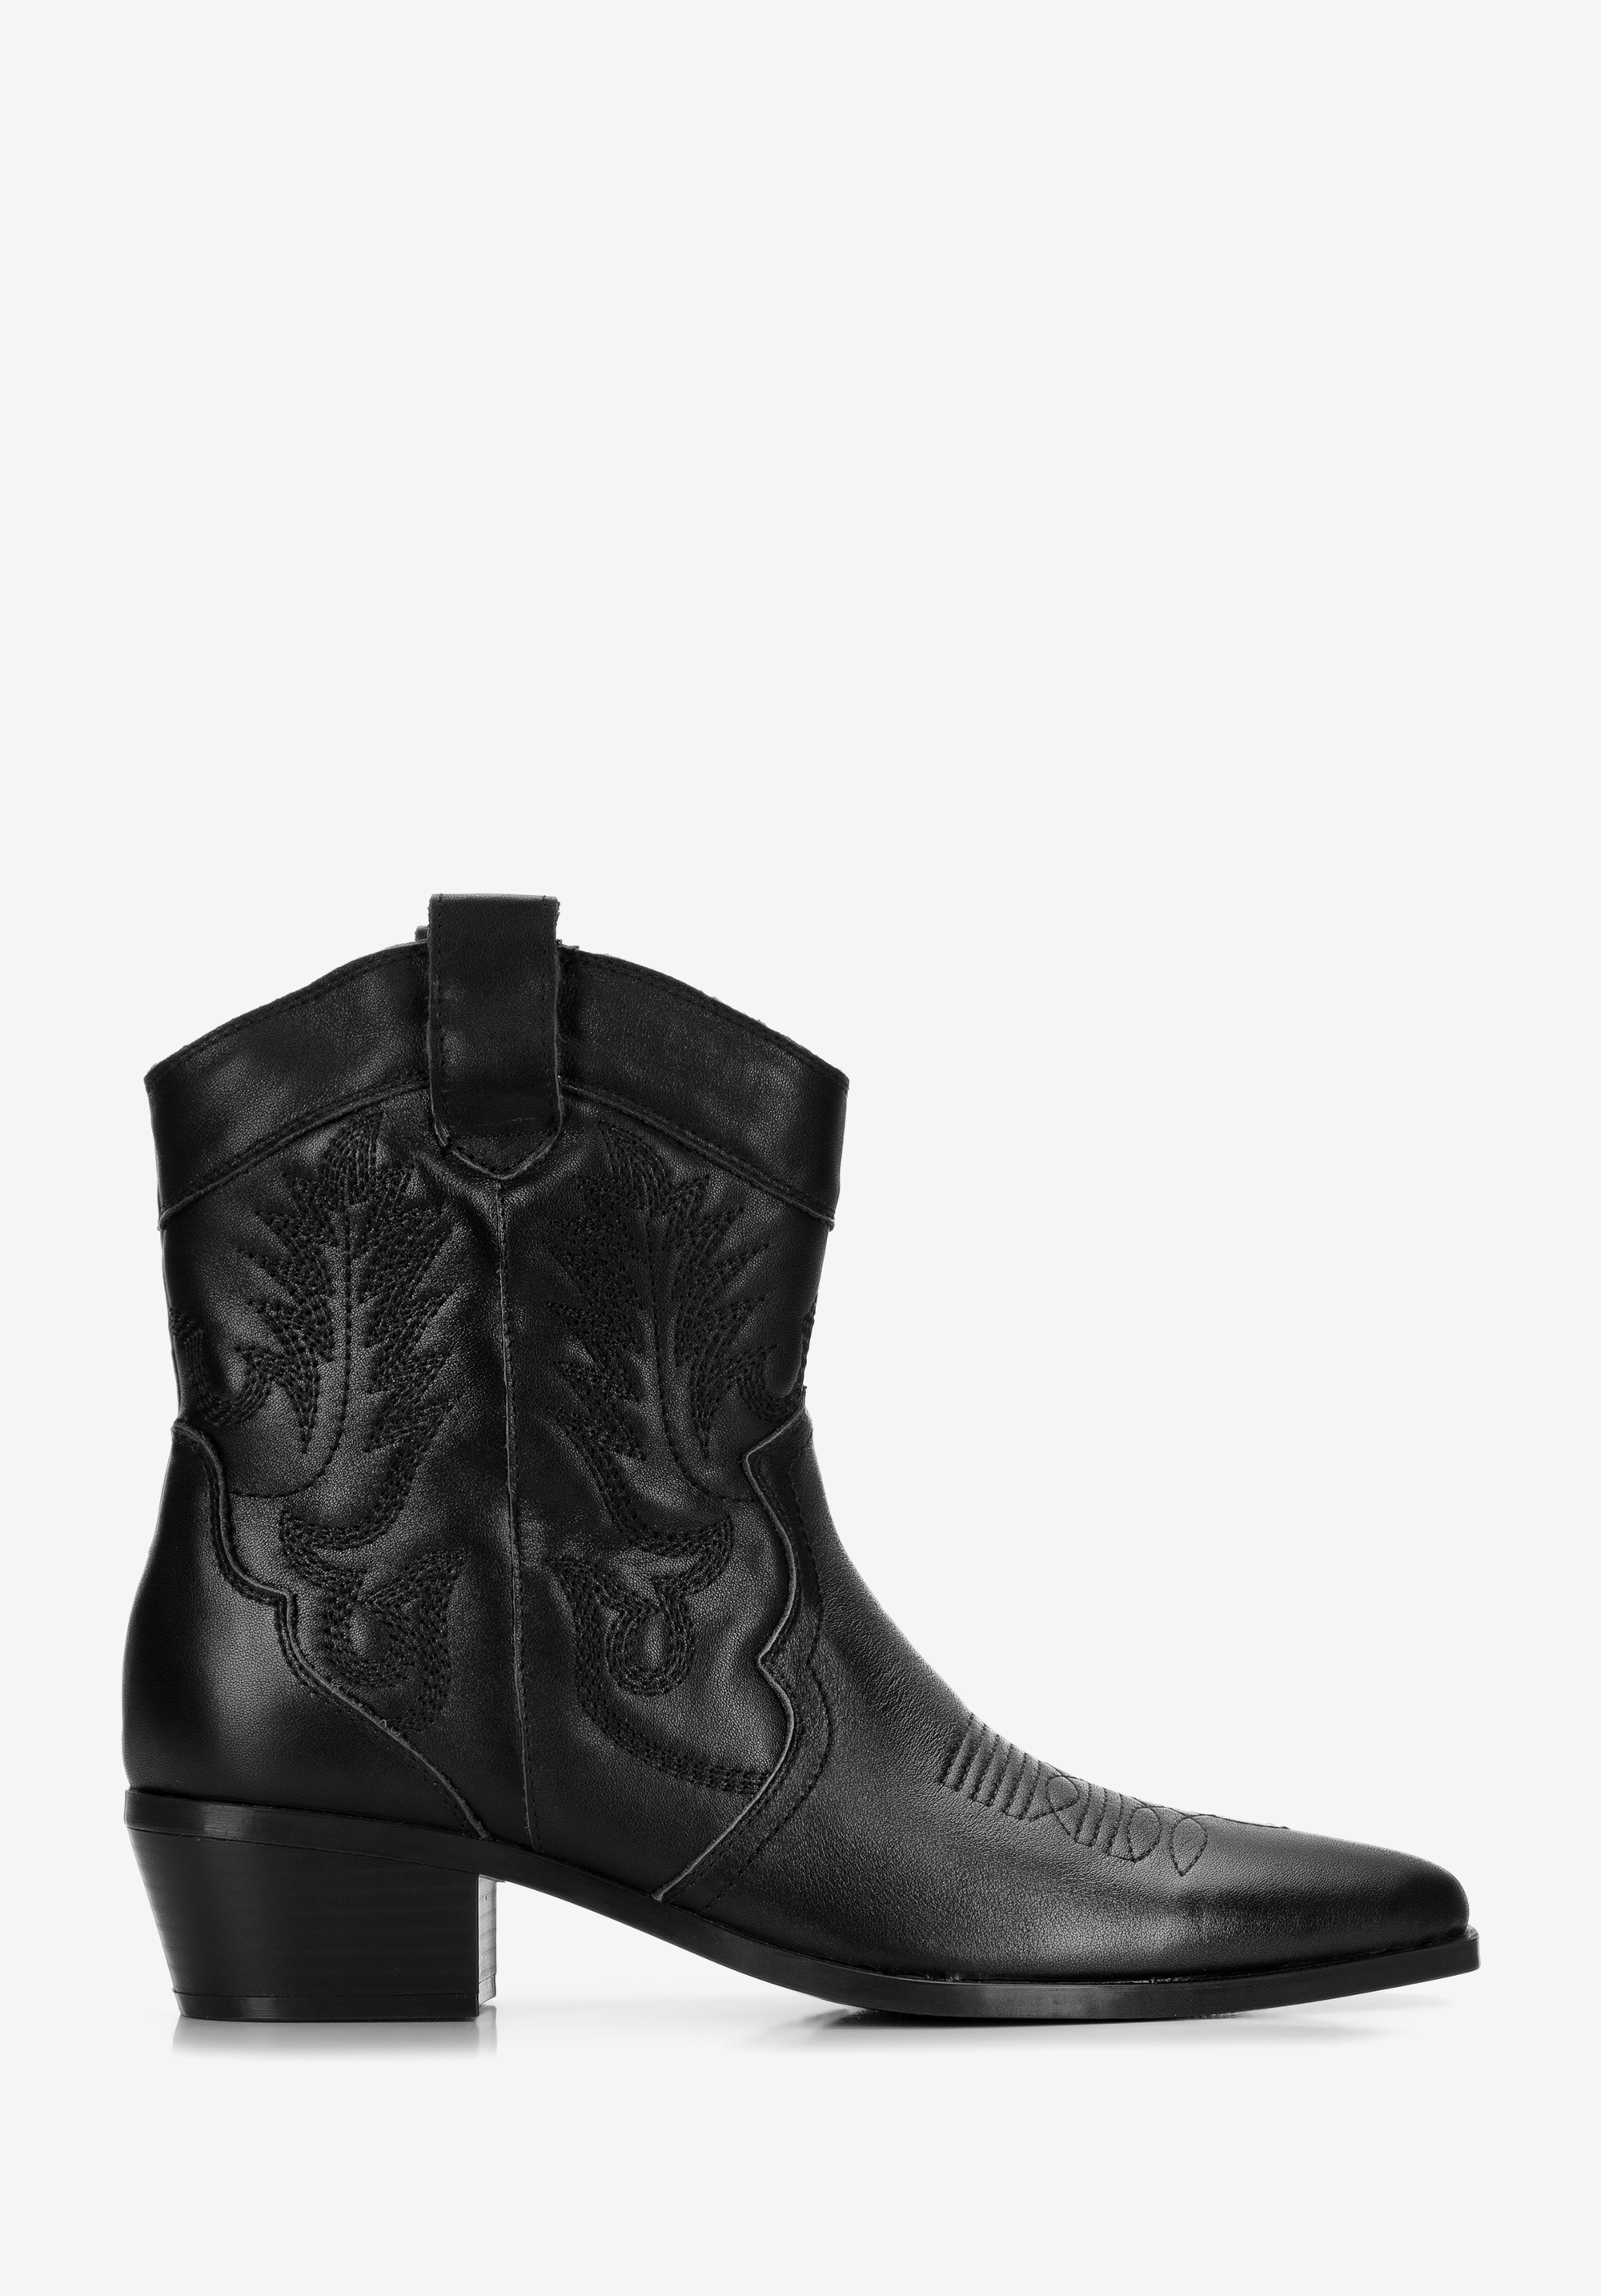 Women's embroidered leather cowboy boots I WITTCHEN